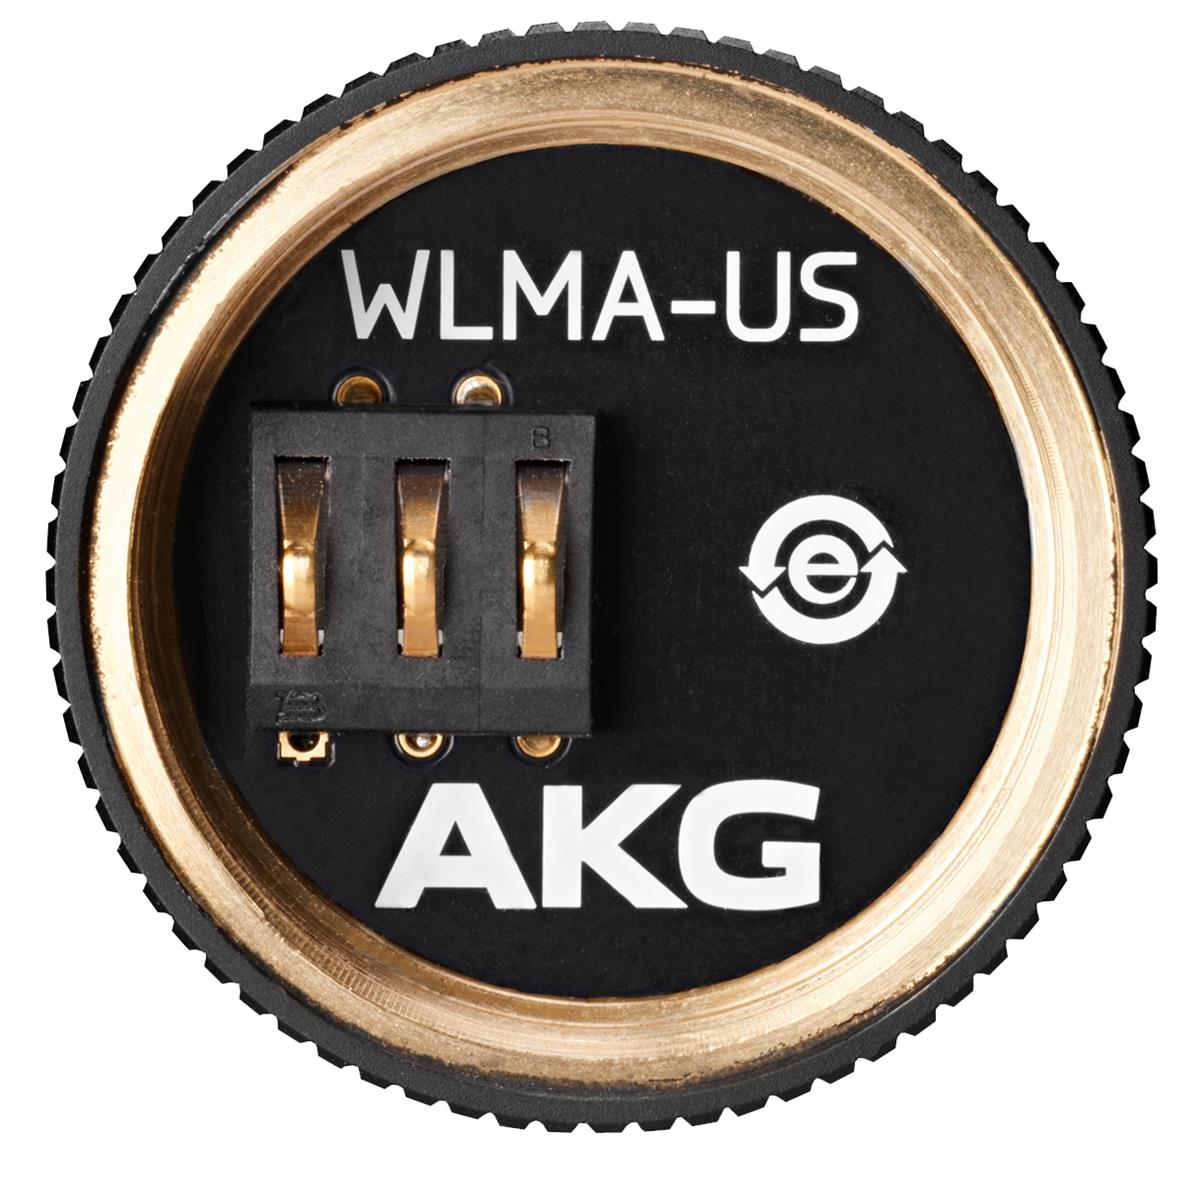 Image of AKG WLMA-US Adapter for Shure Wireless Microphone Heads